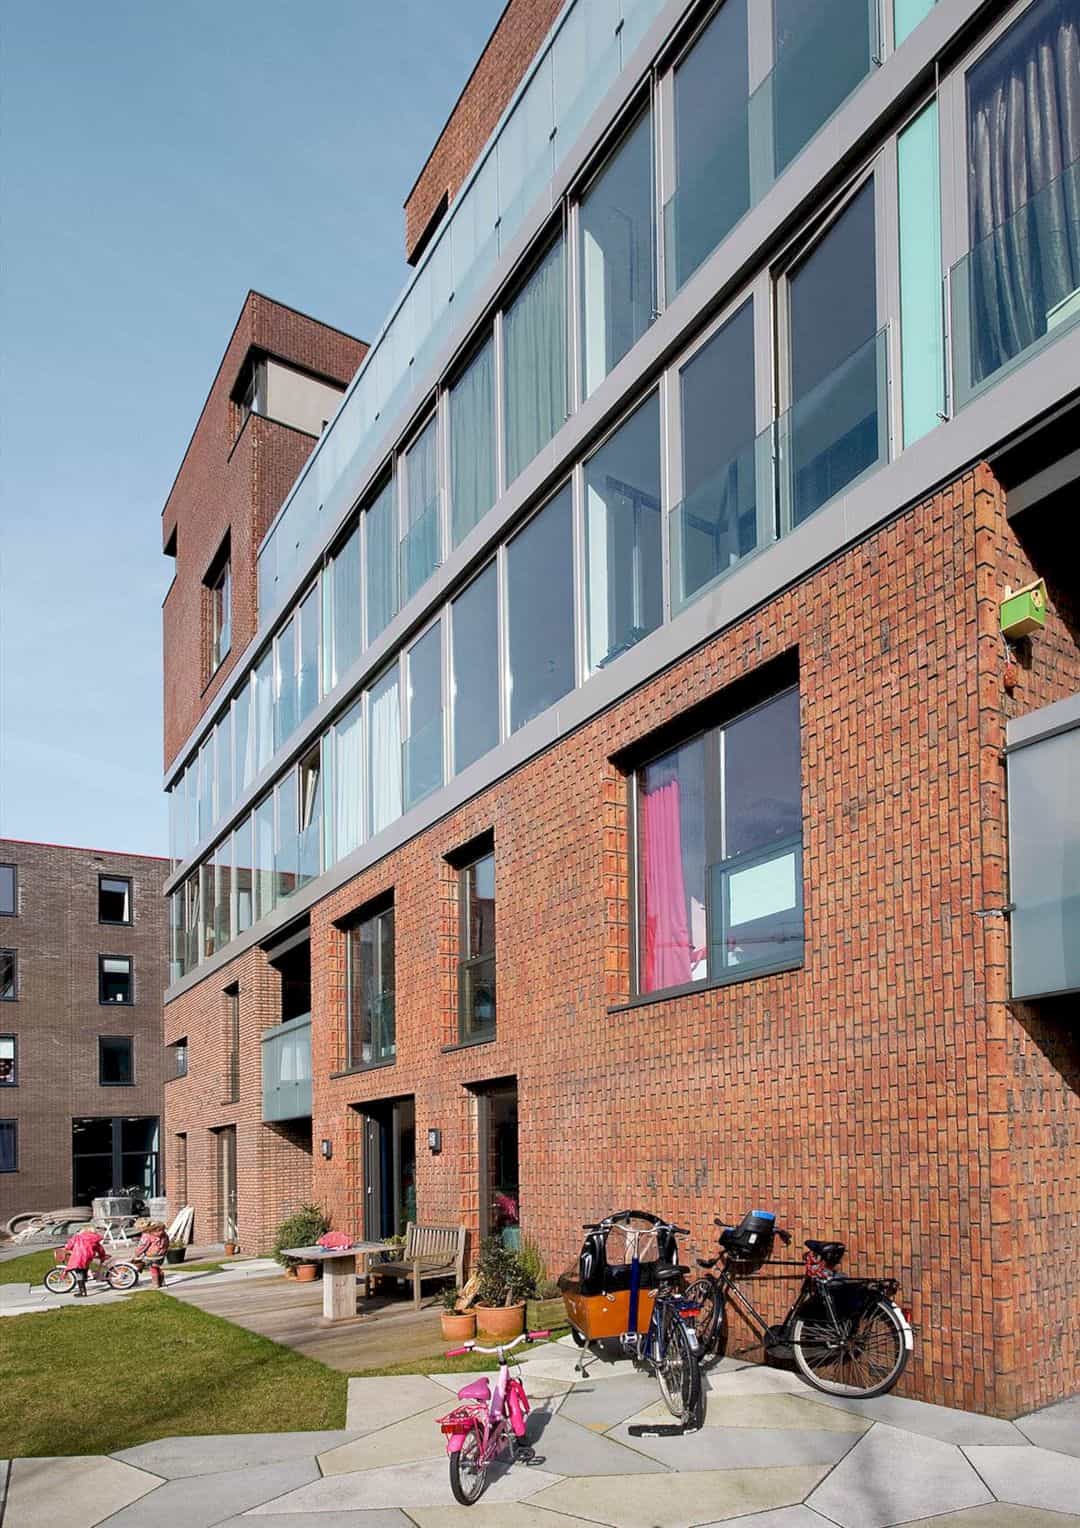 Urban Villa Myriad A Residential Building That Stands Out In Funenpark Amsterdam 1